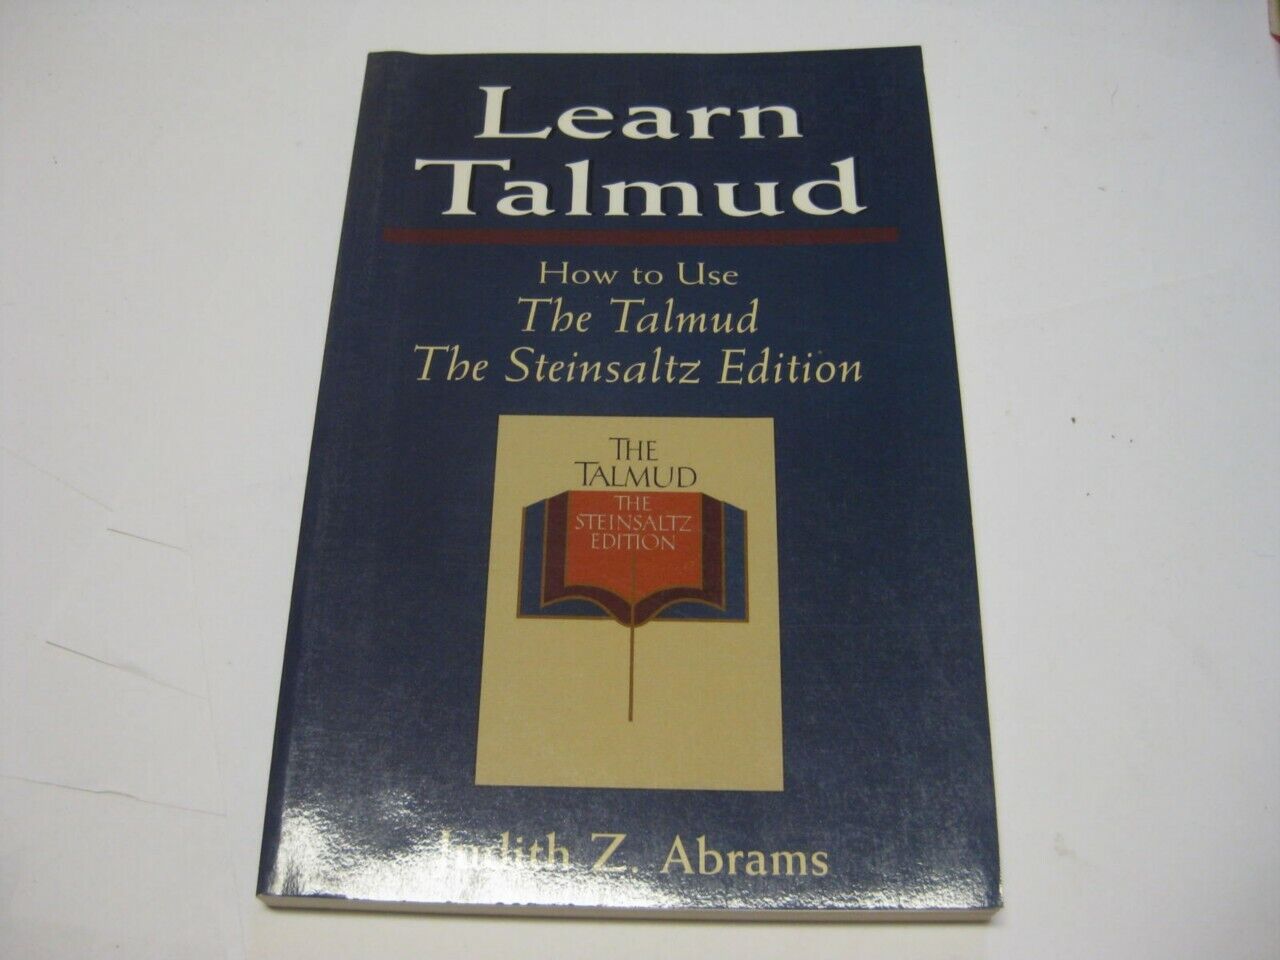 Learn Talmud: How to Use The Talmud- The Steinsaltz Edition